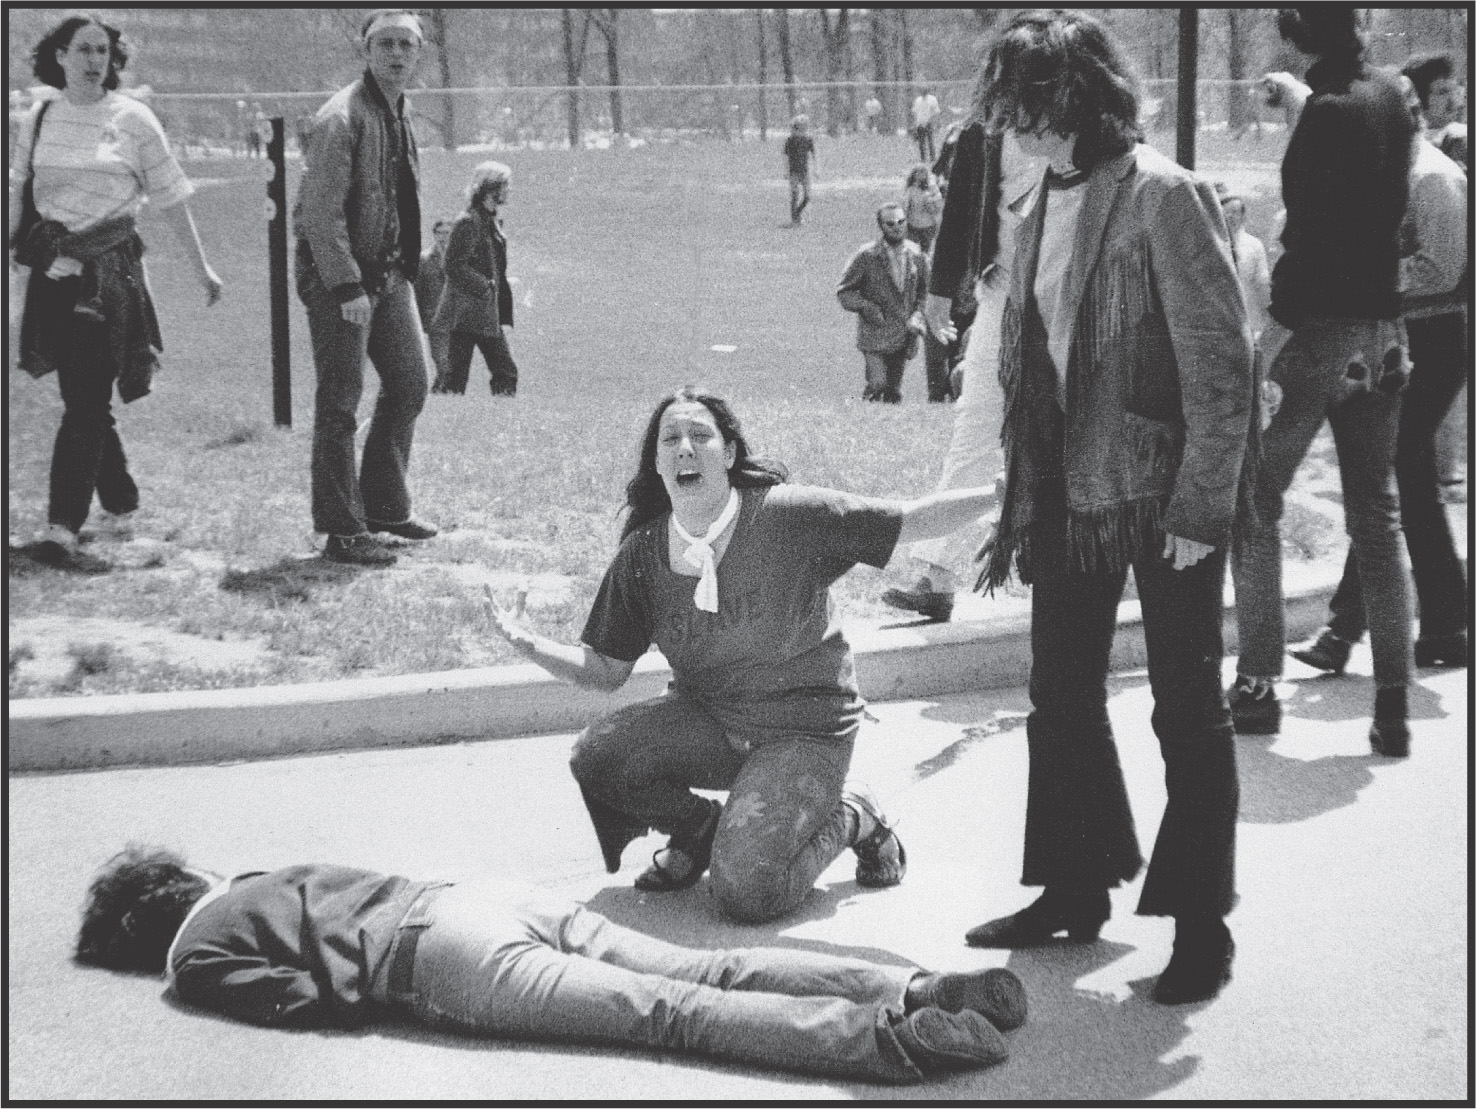 photo: Her mouth gaping, a young woman kneels over a man lying on the ground.